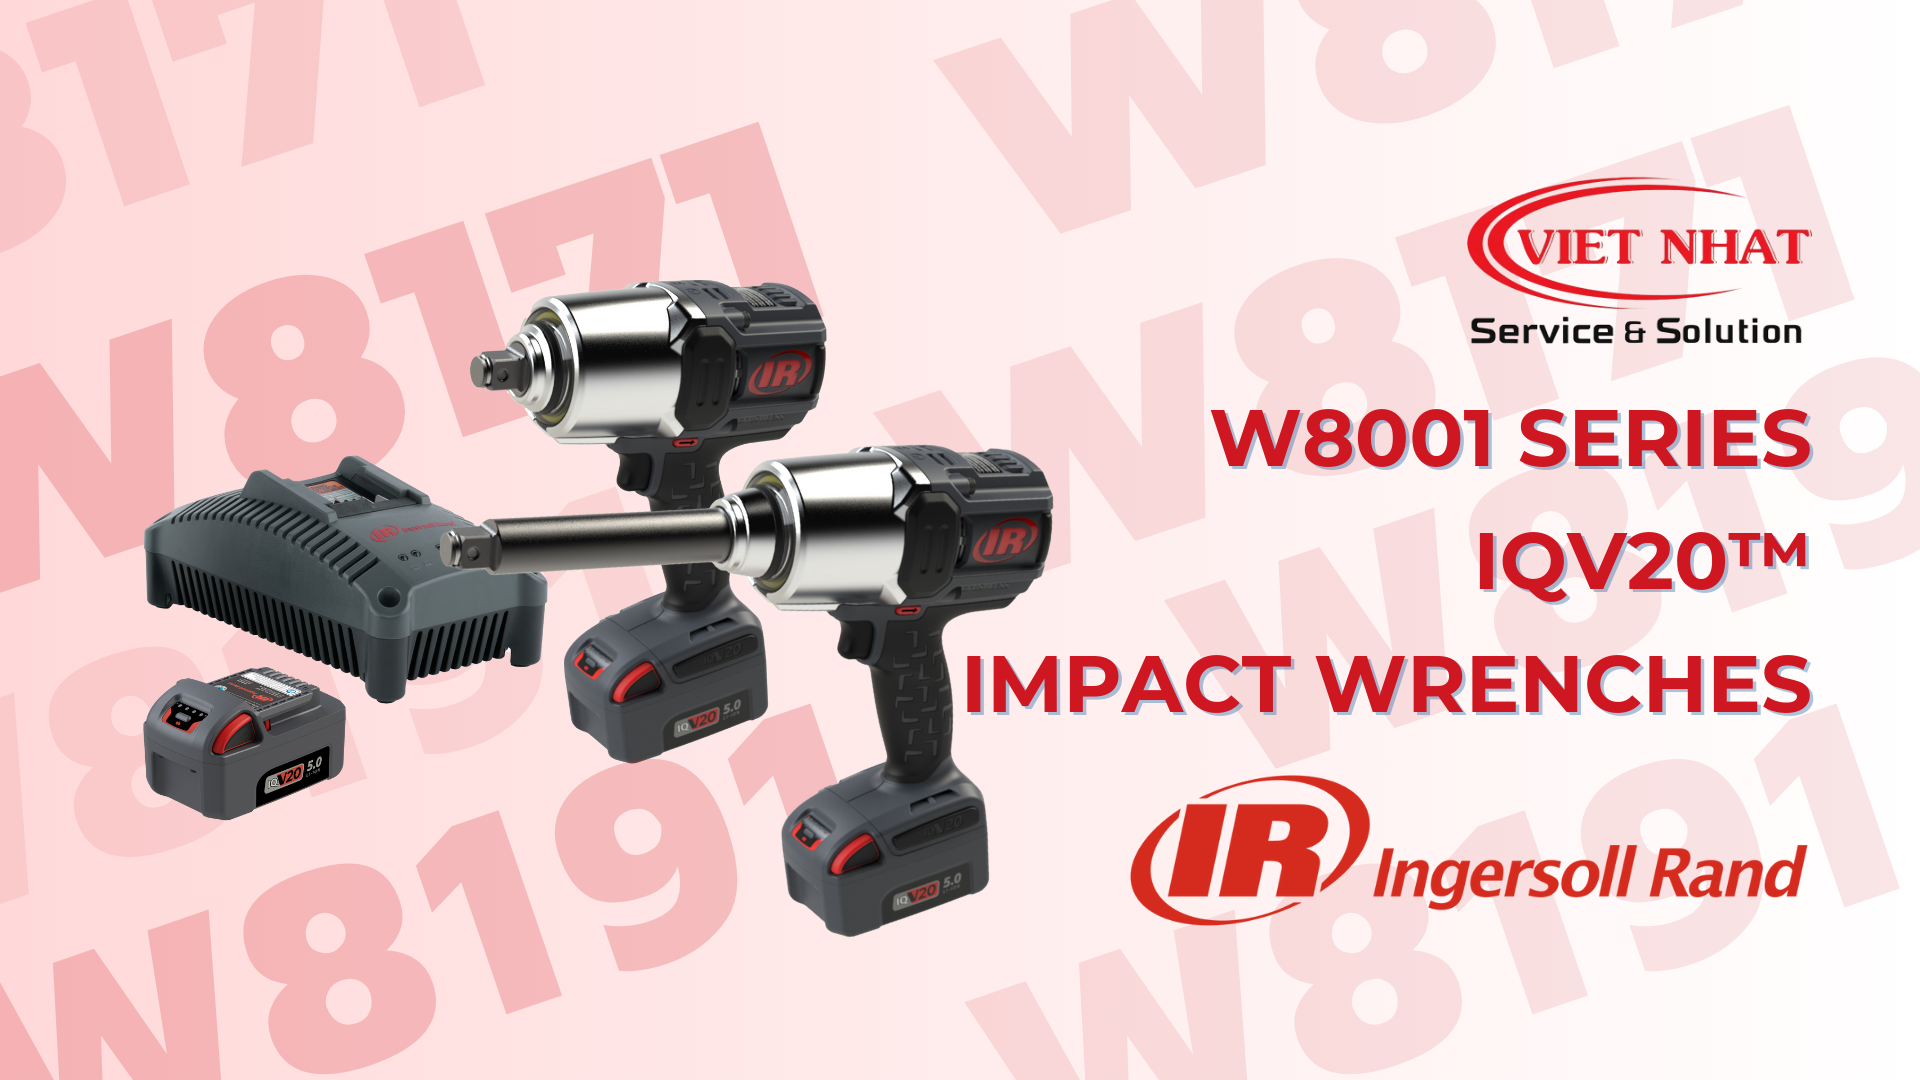 W8001 Series IQV20™ Impact Wrenches